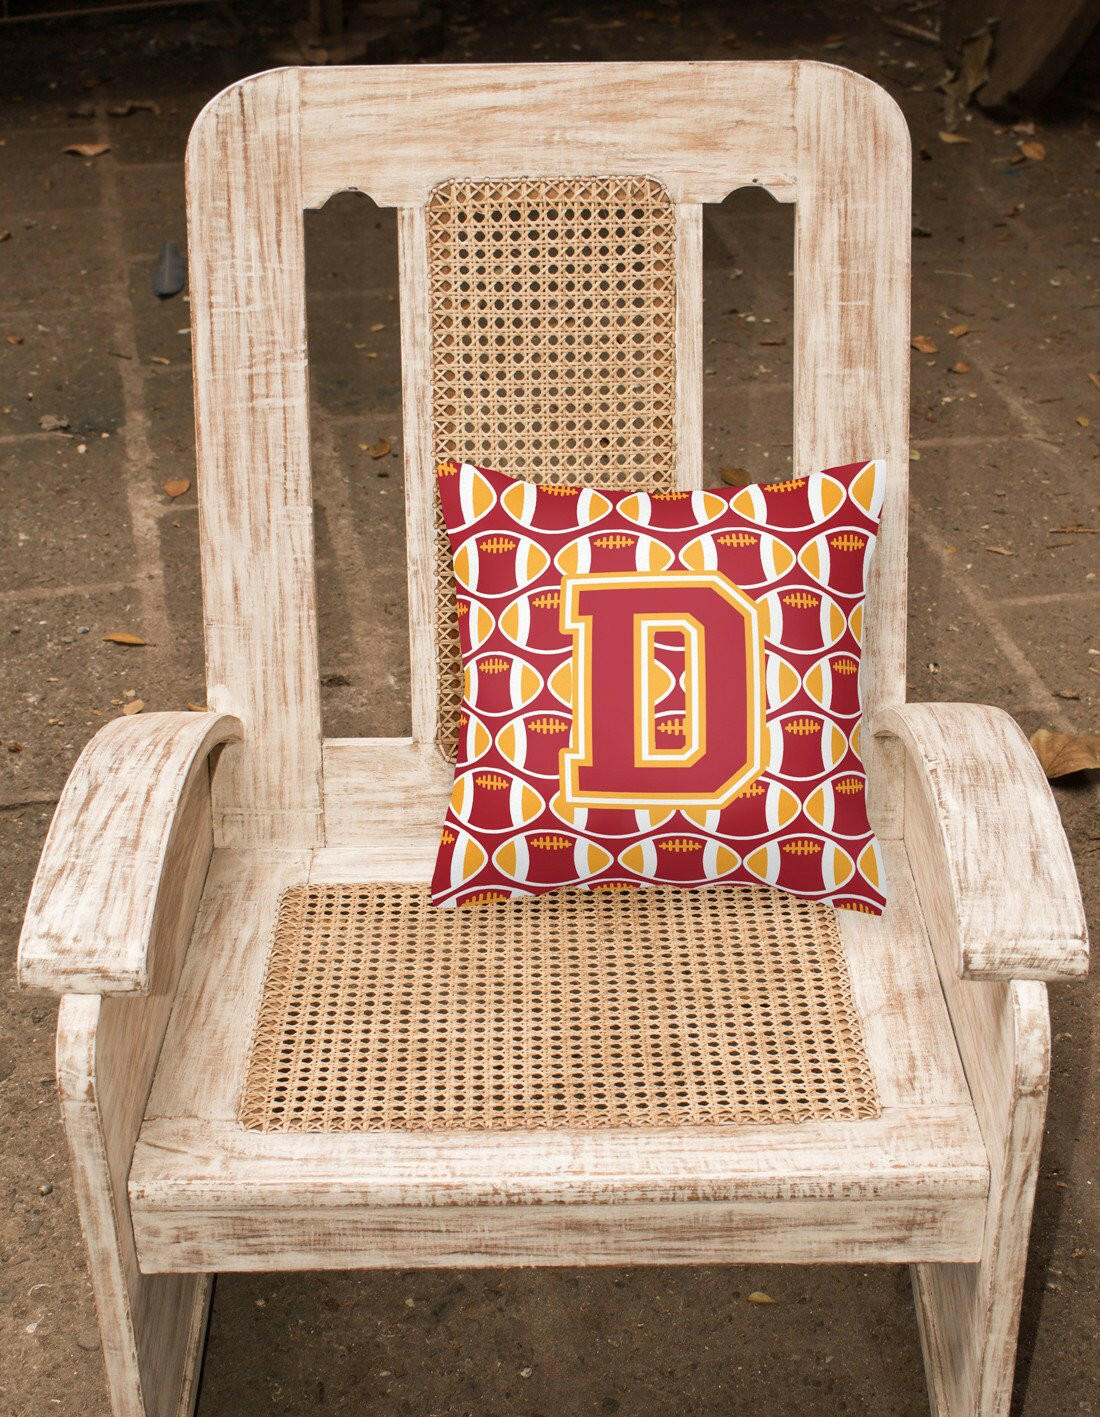 Letter D Football Cardinal and Gold Fabric Decorative Pillow CJ1070-DPW1414 by Caroline's Treasures